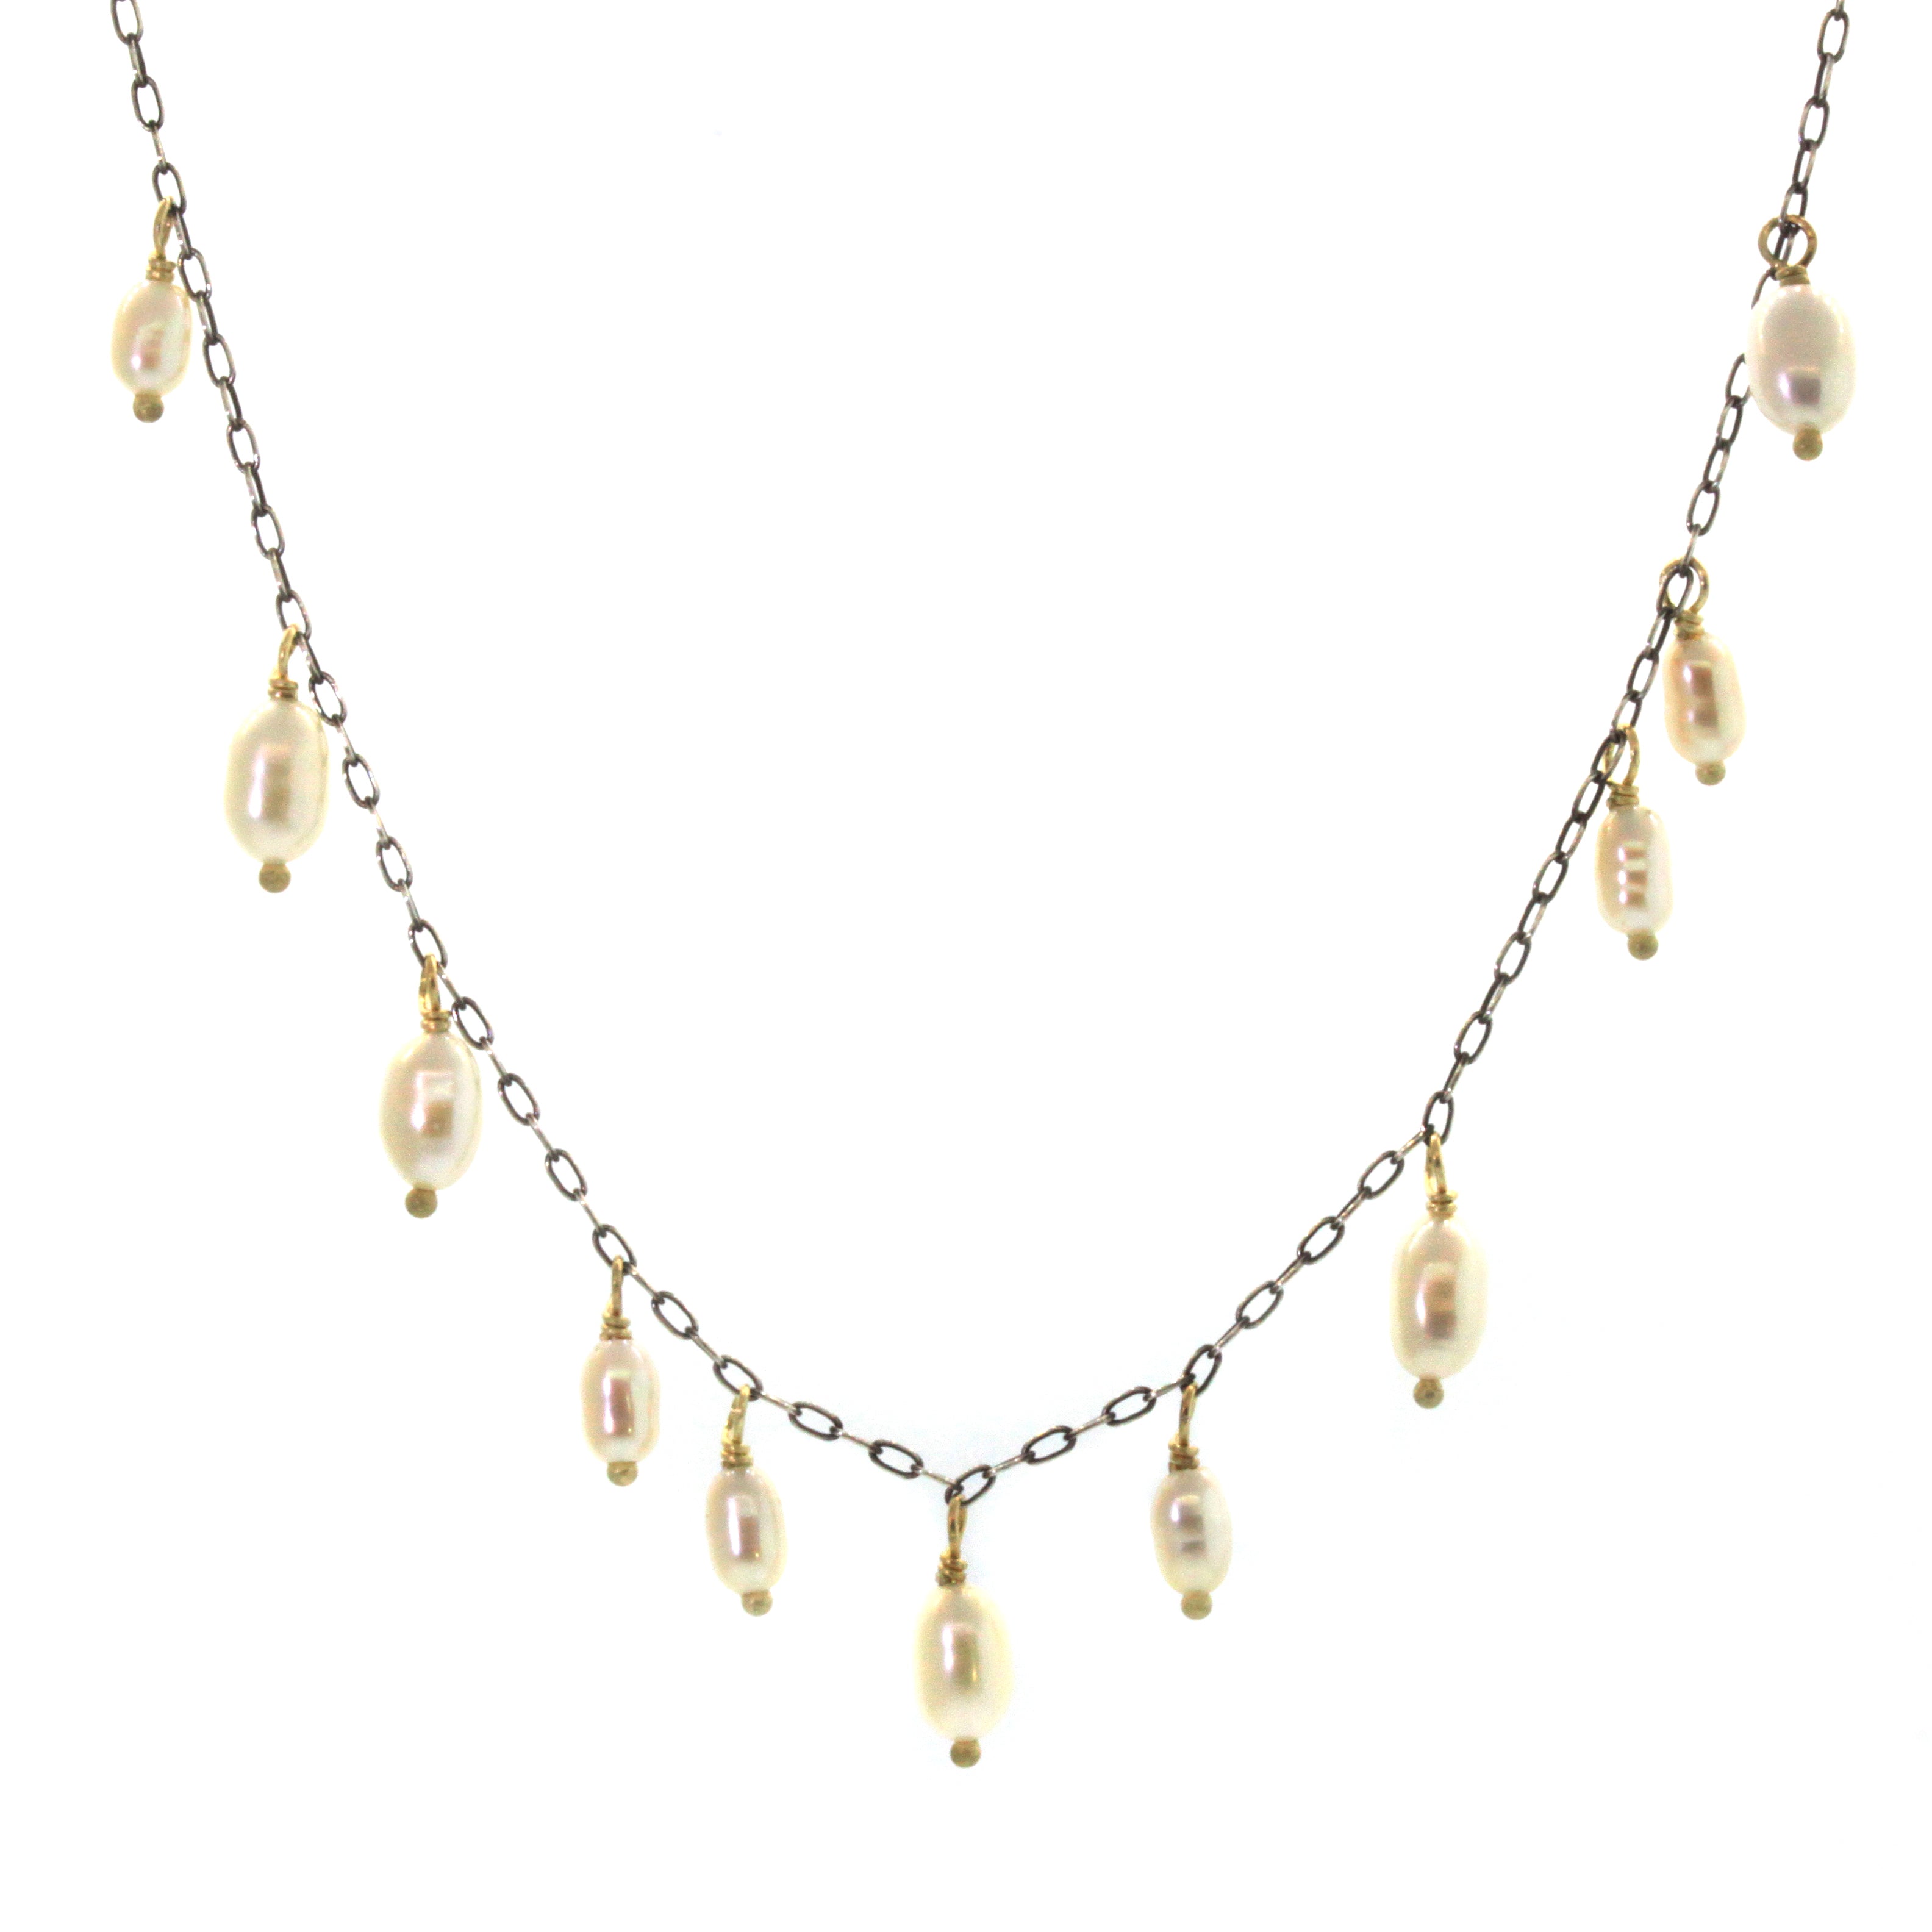 This Cream Biwa Pearl Necklace was hand crafted at Studio 703 + RLD by Rebecca Lankford. It features 11 freshwater cream pearls set in yellow gold and dangling from a brushed oxidized chain. 